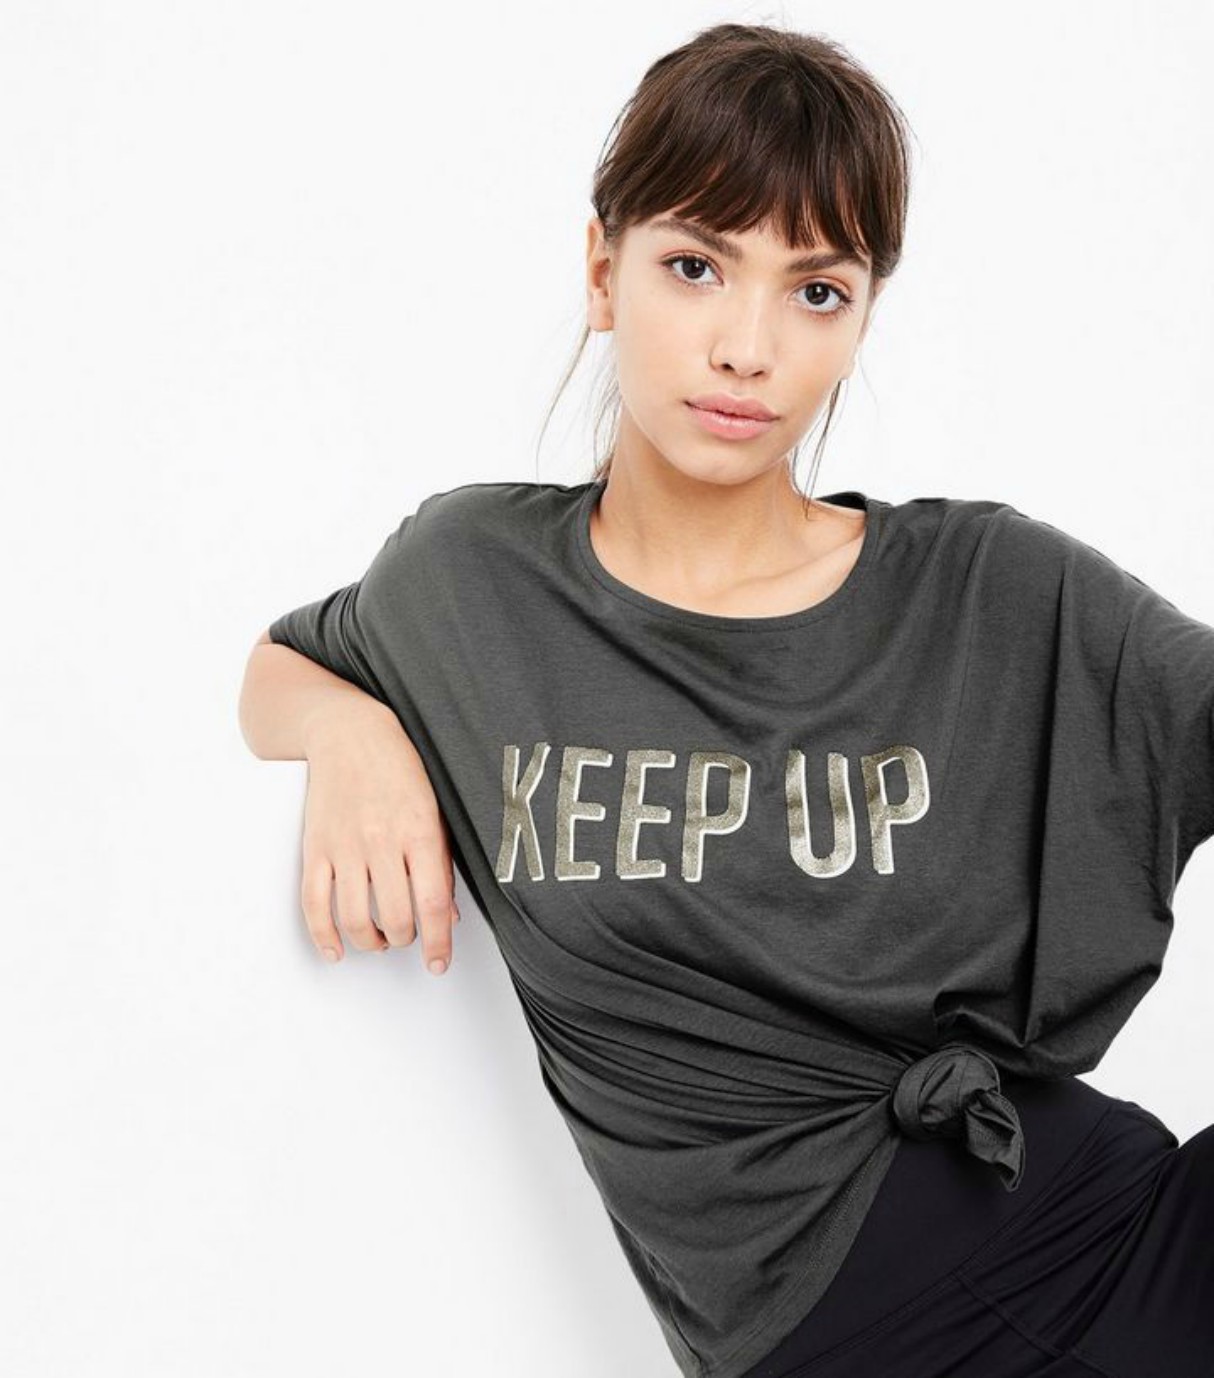 fitness-fashion-style-workout-new-look-slogan-top